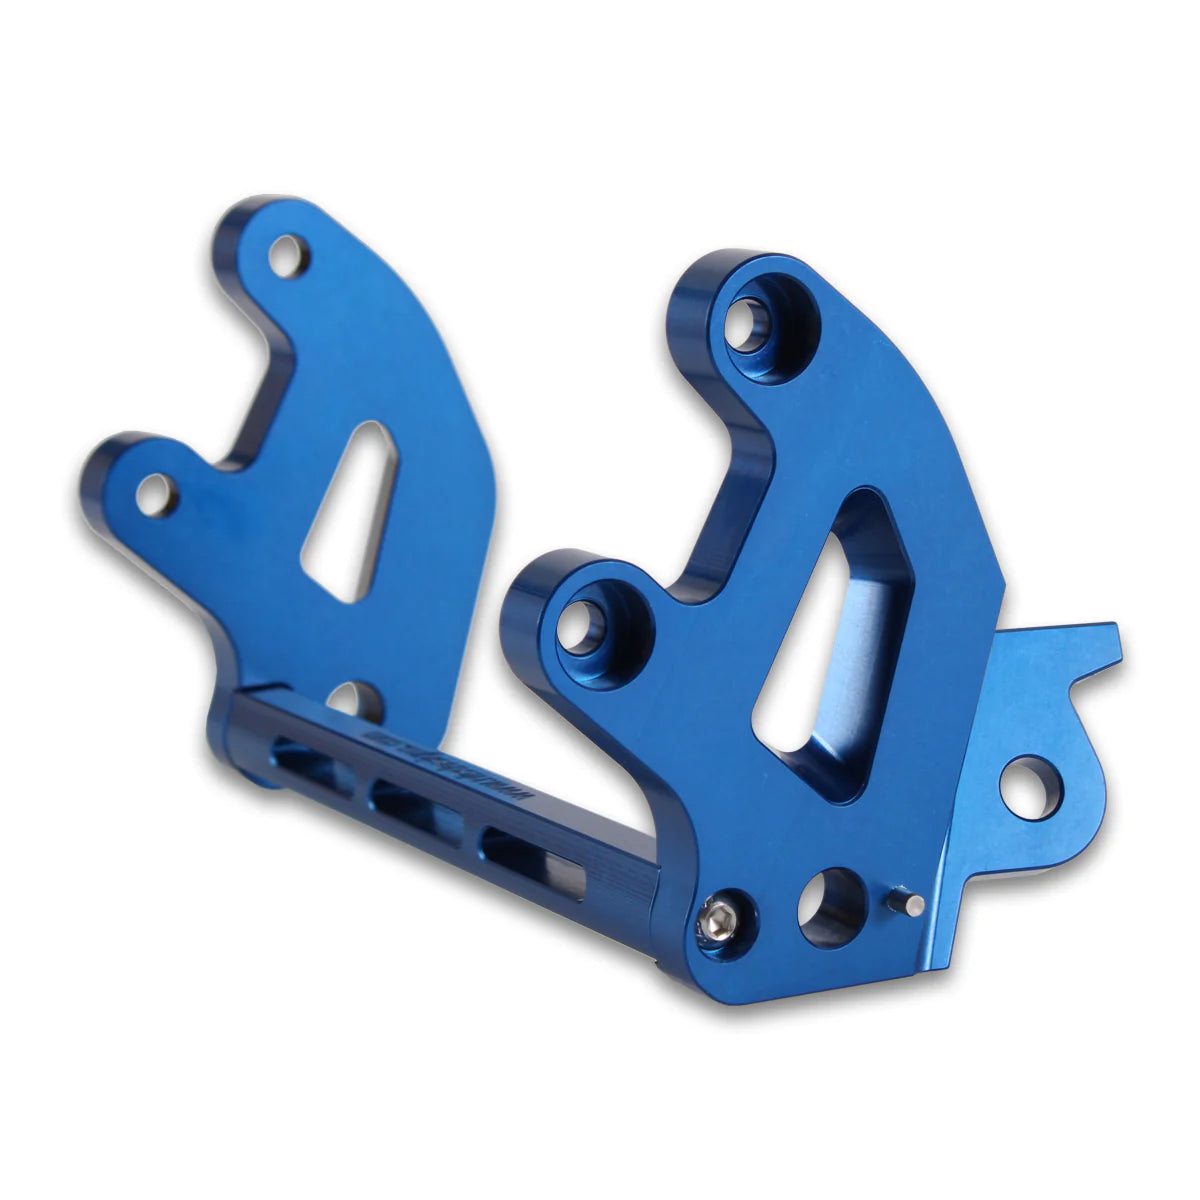 Lowering Peg Bracket Set With Kickstand Option and Support Brace